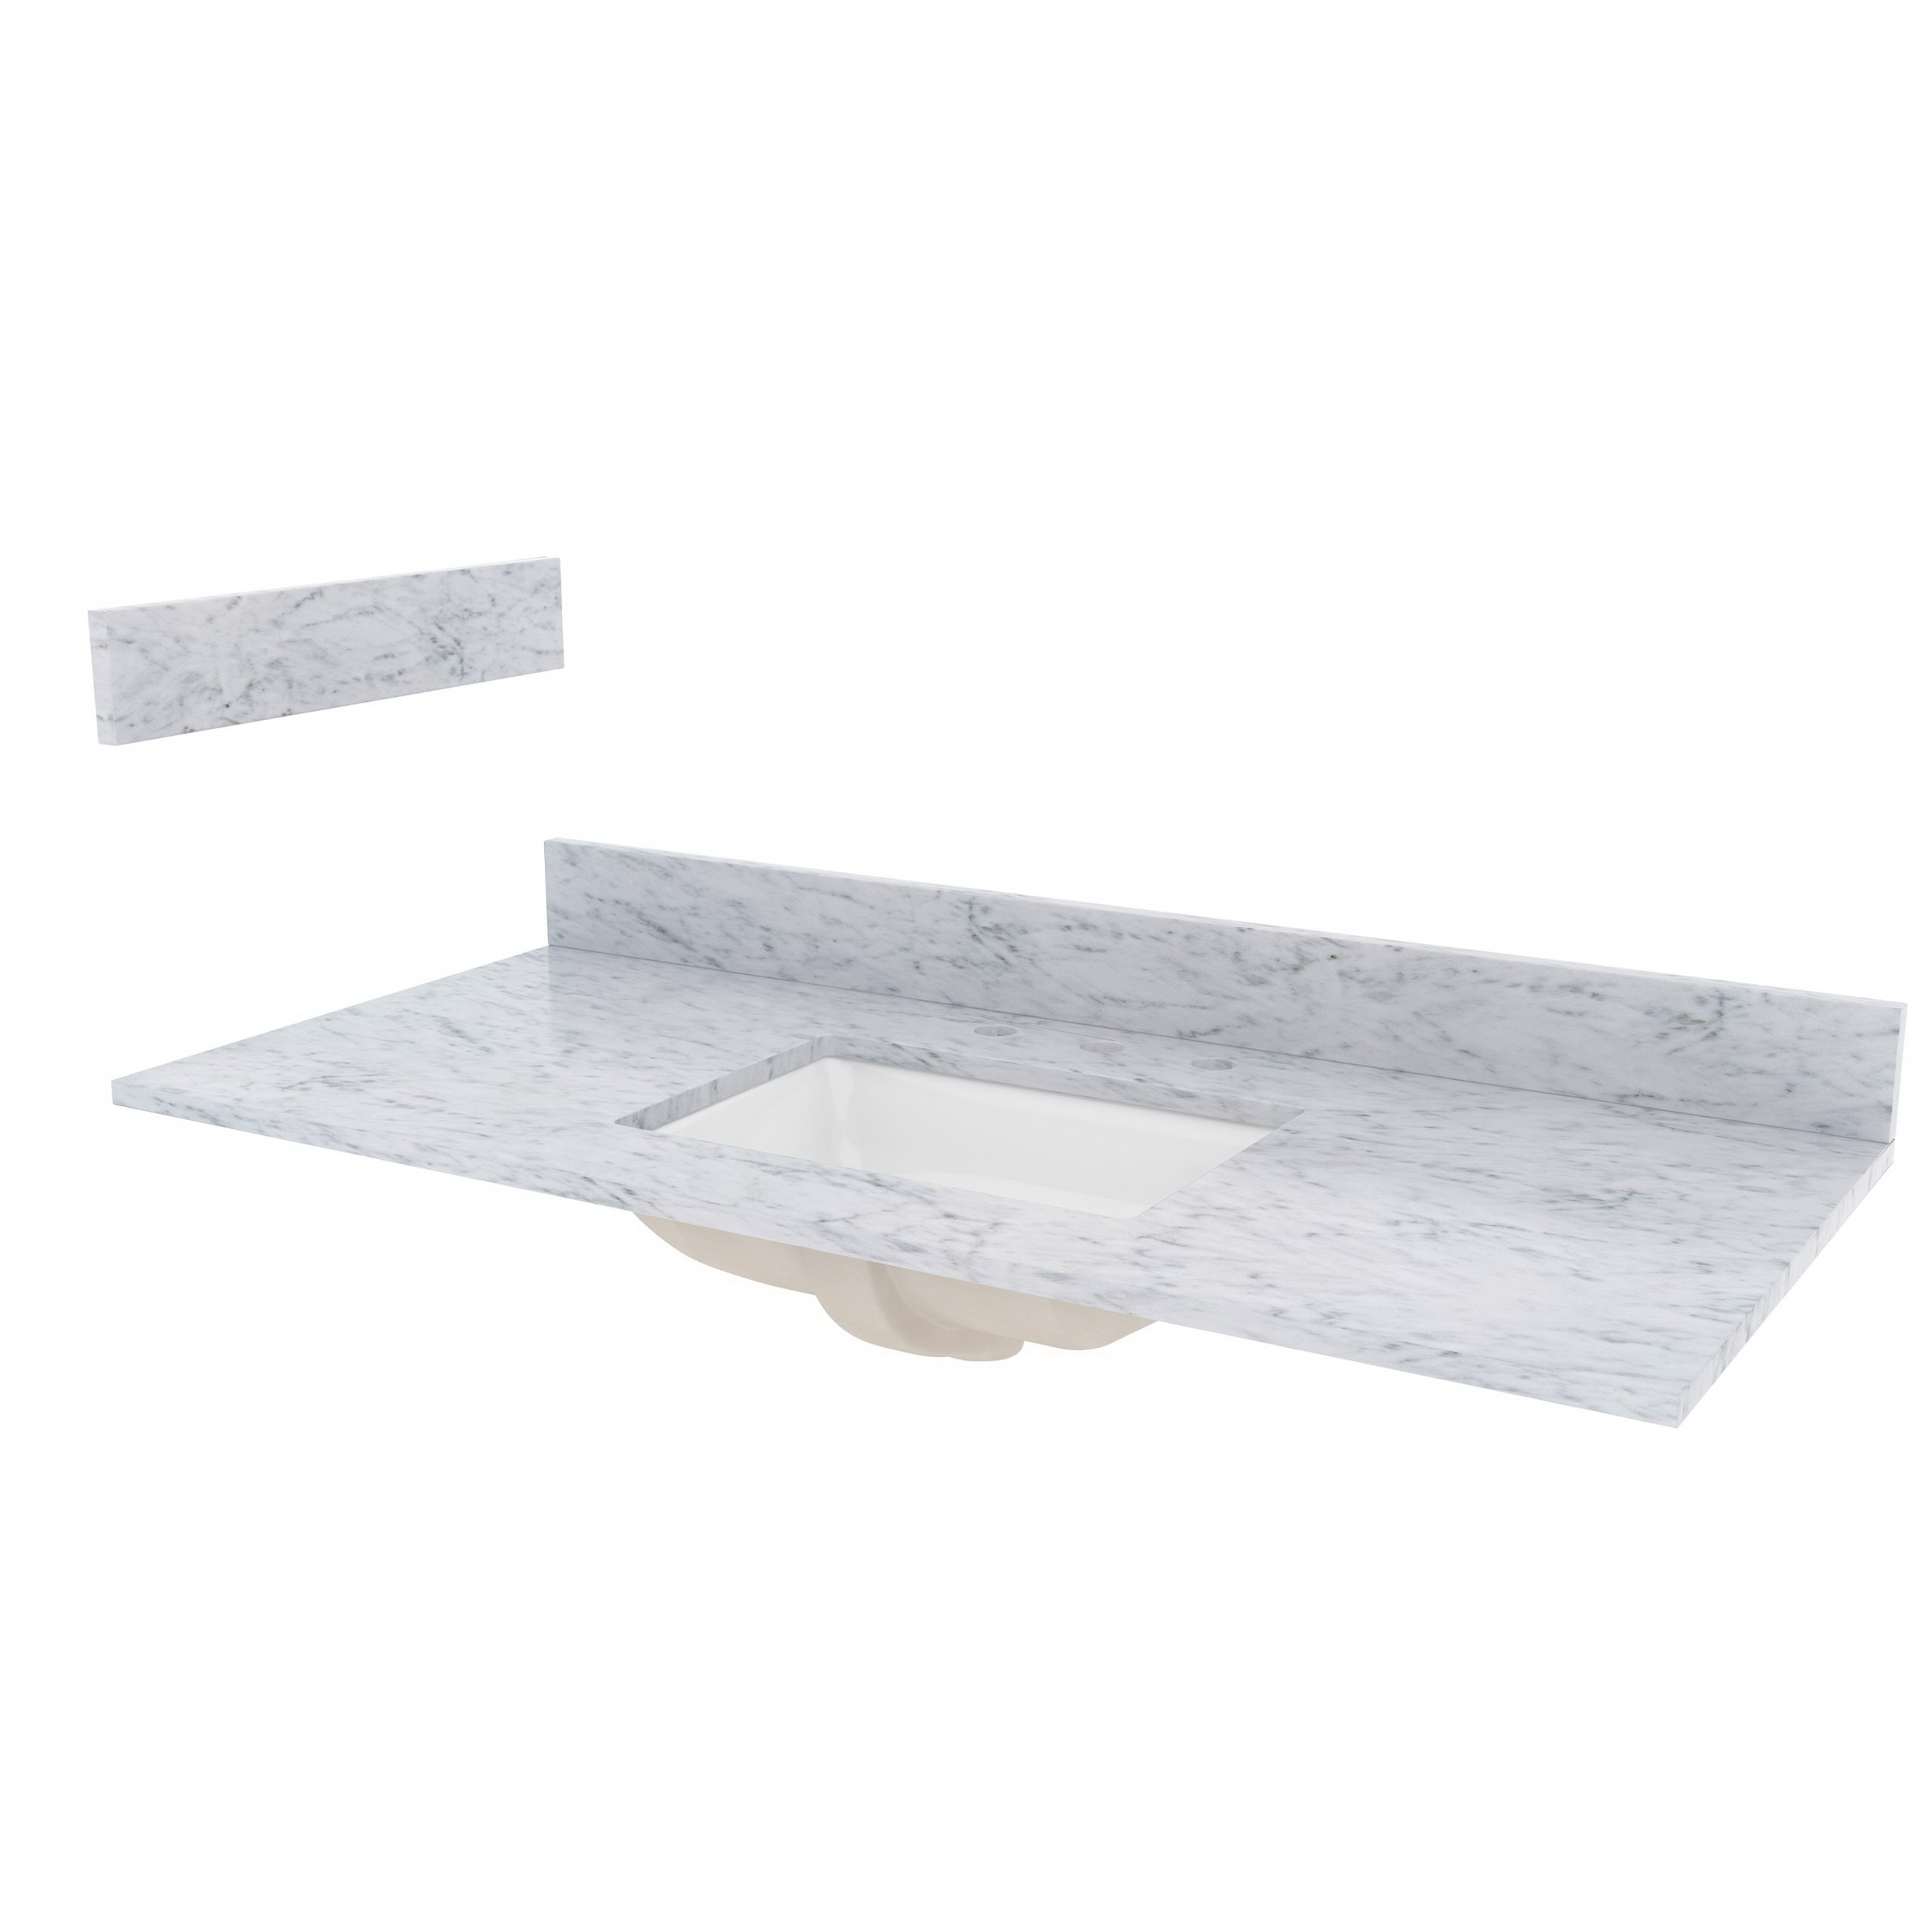 ST37228CWR Vanity Top, 22 in OAL, 37 in OAW, Marble, Carrara White, Undermount Sink, 1-Bowl, Rectangular Bowl